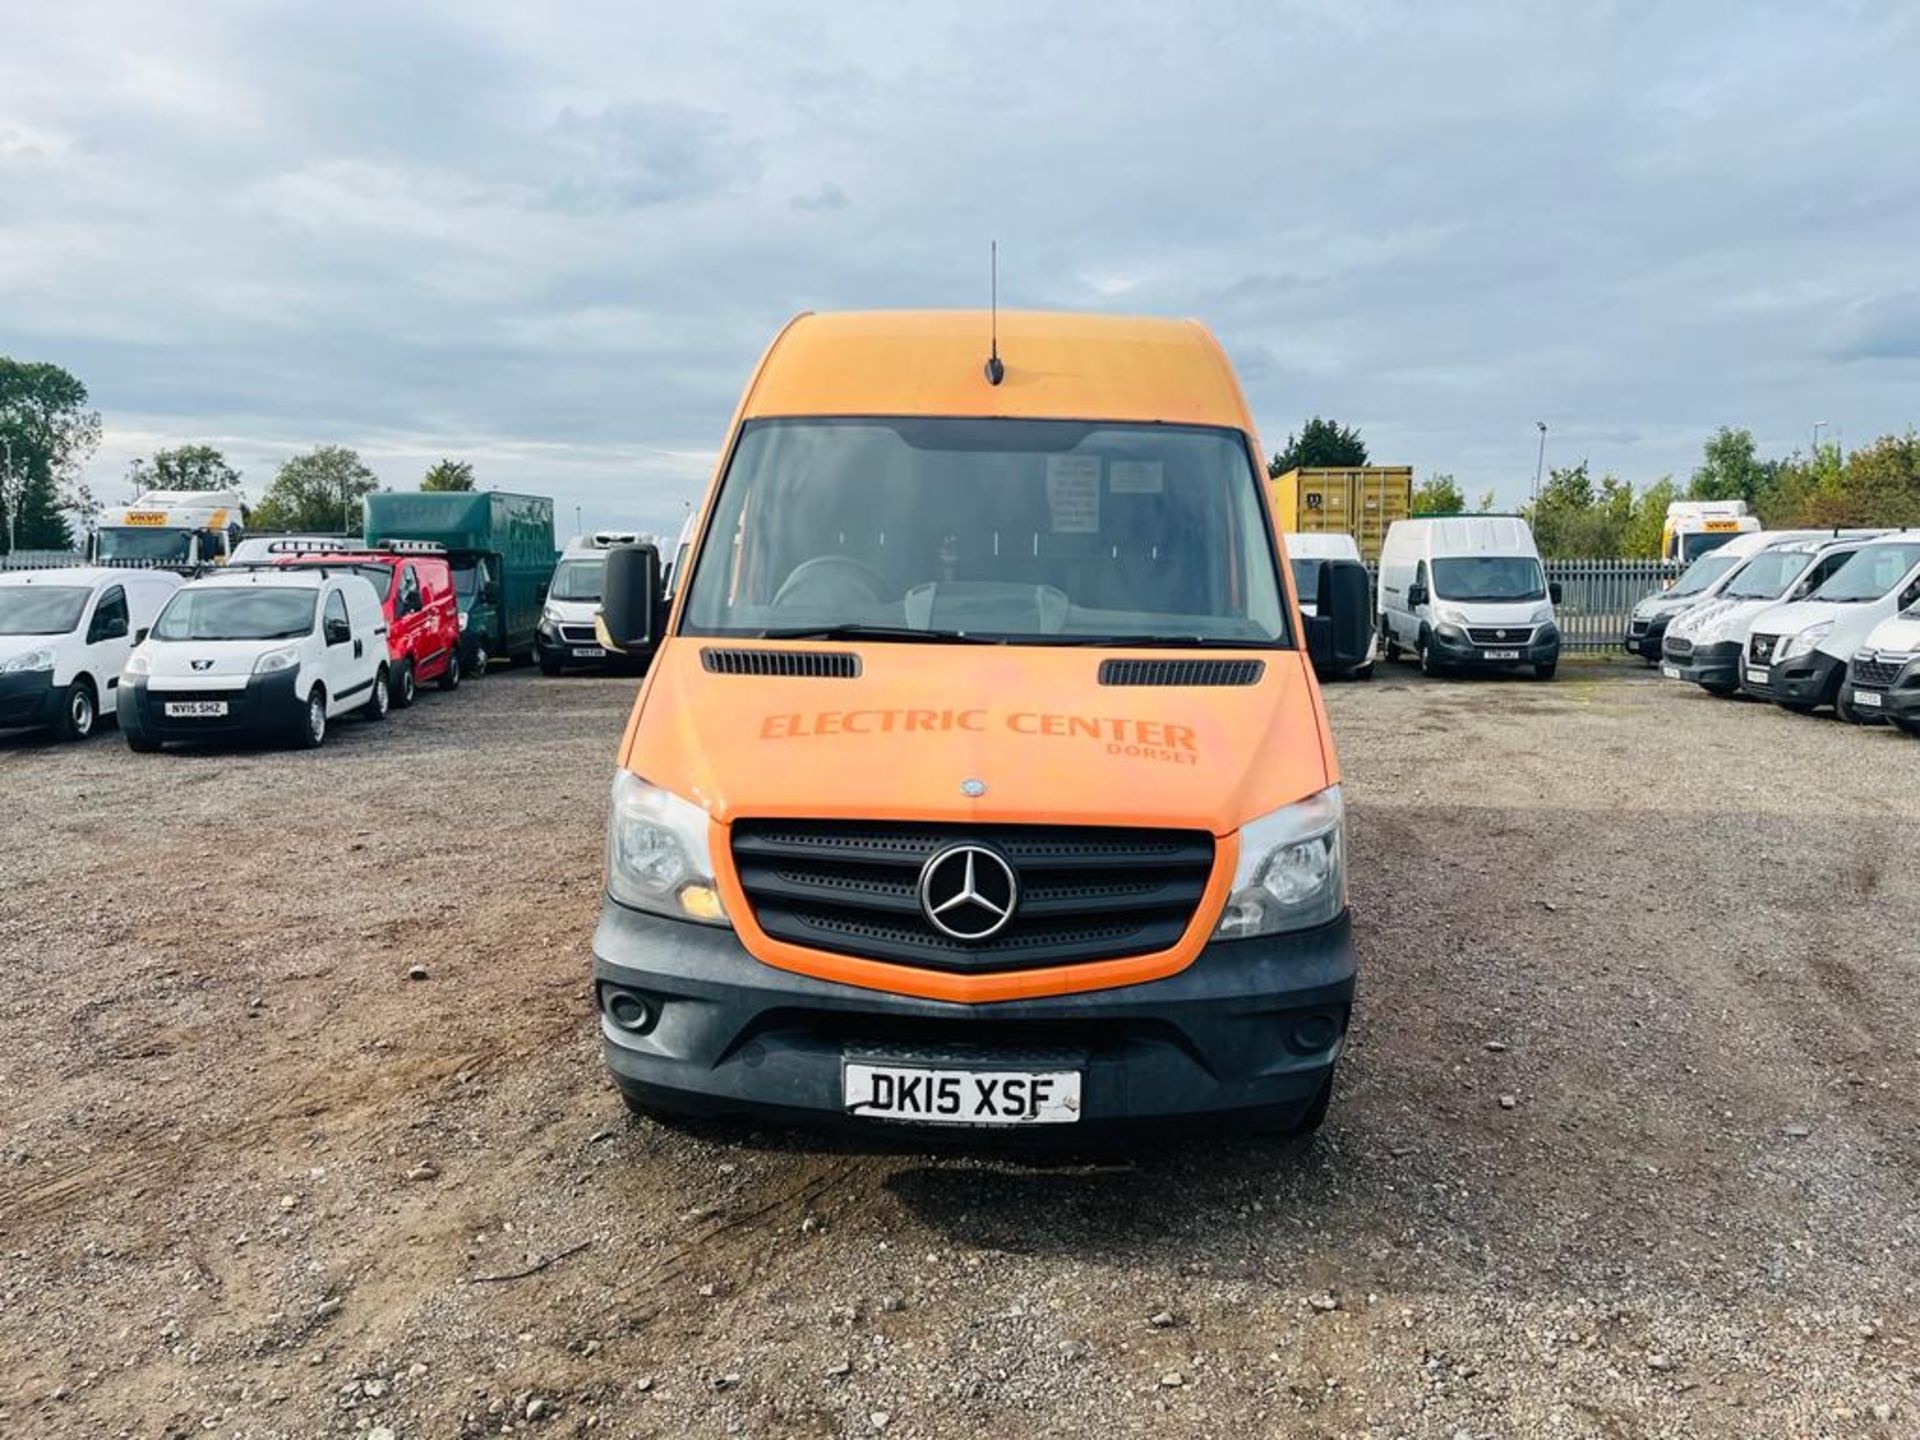 Mercedes Benz Sprinter 2.1 313 CDI 2015 '15 Reg' L3 H3 - Panel Van - One Owner from new - Image 2 of 27